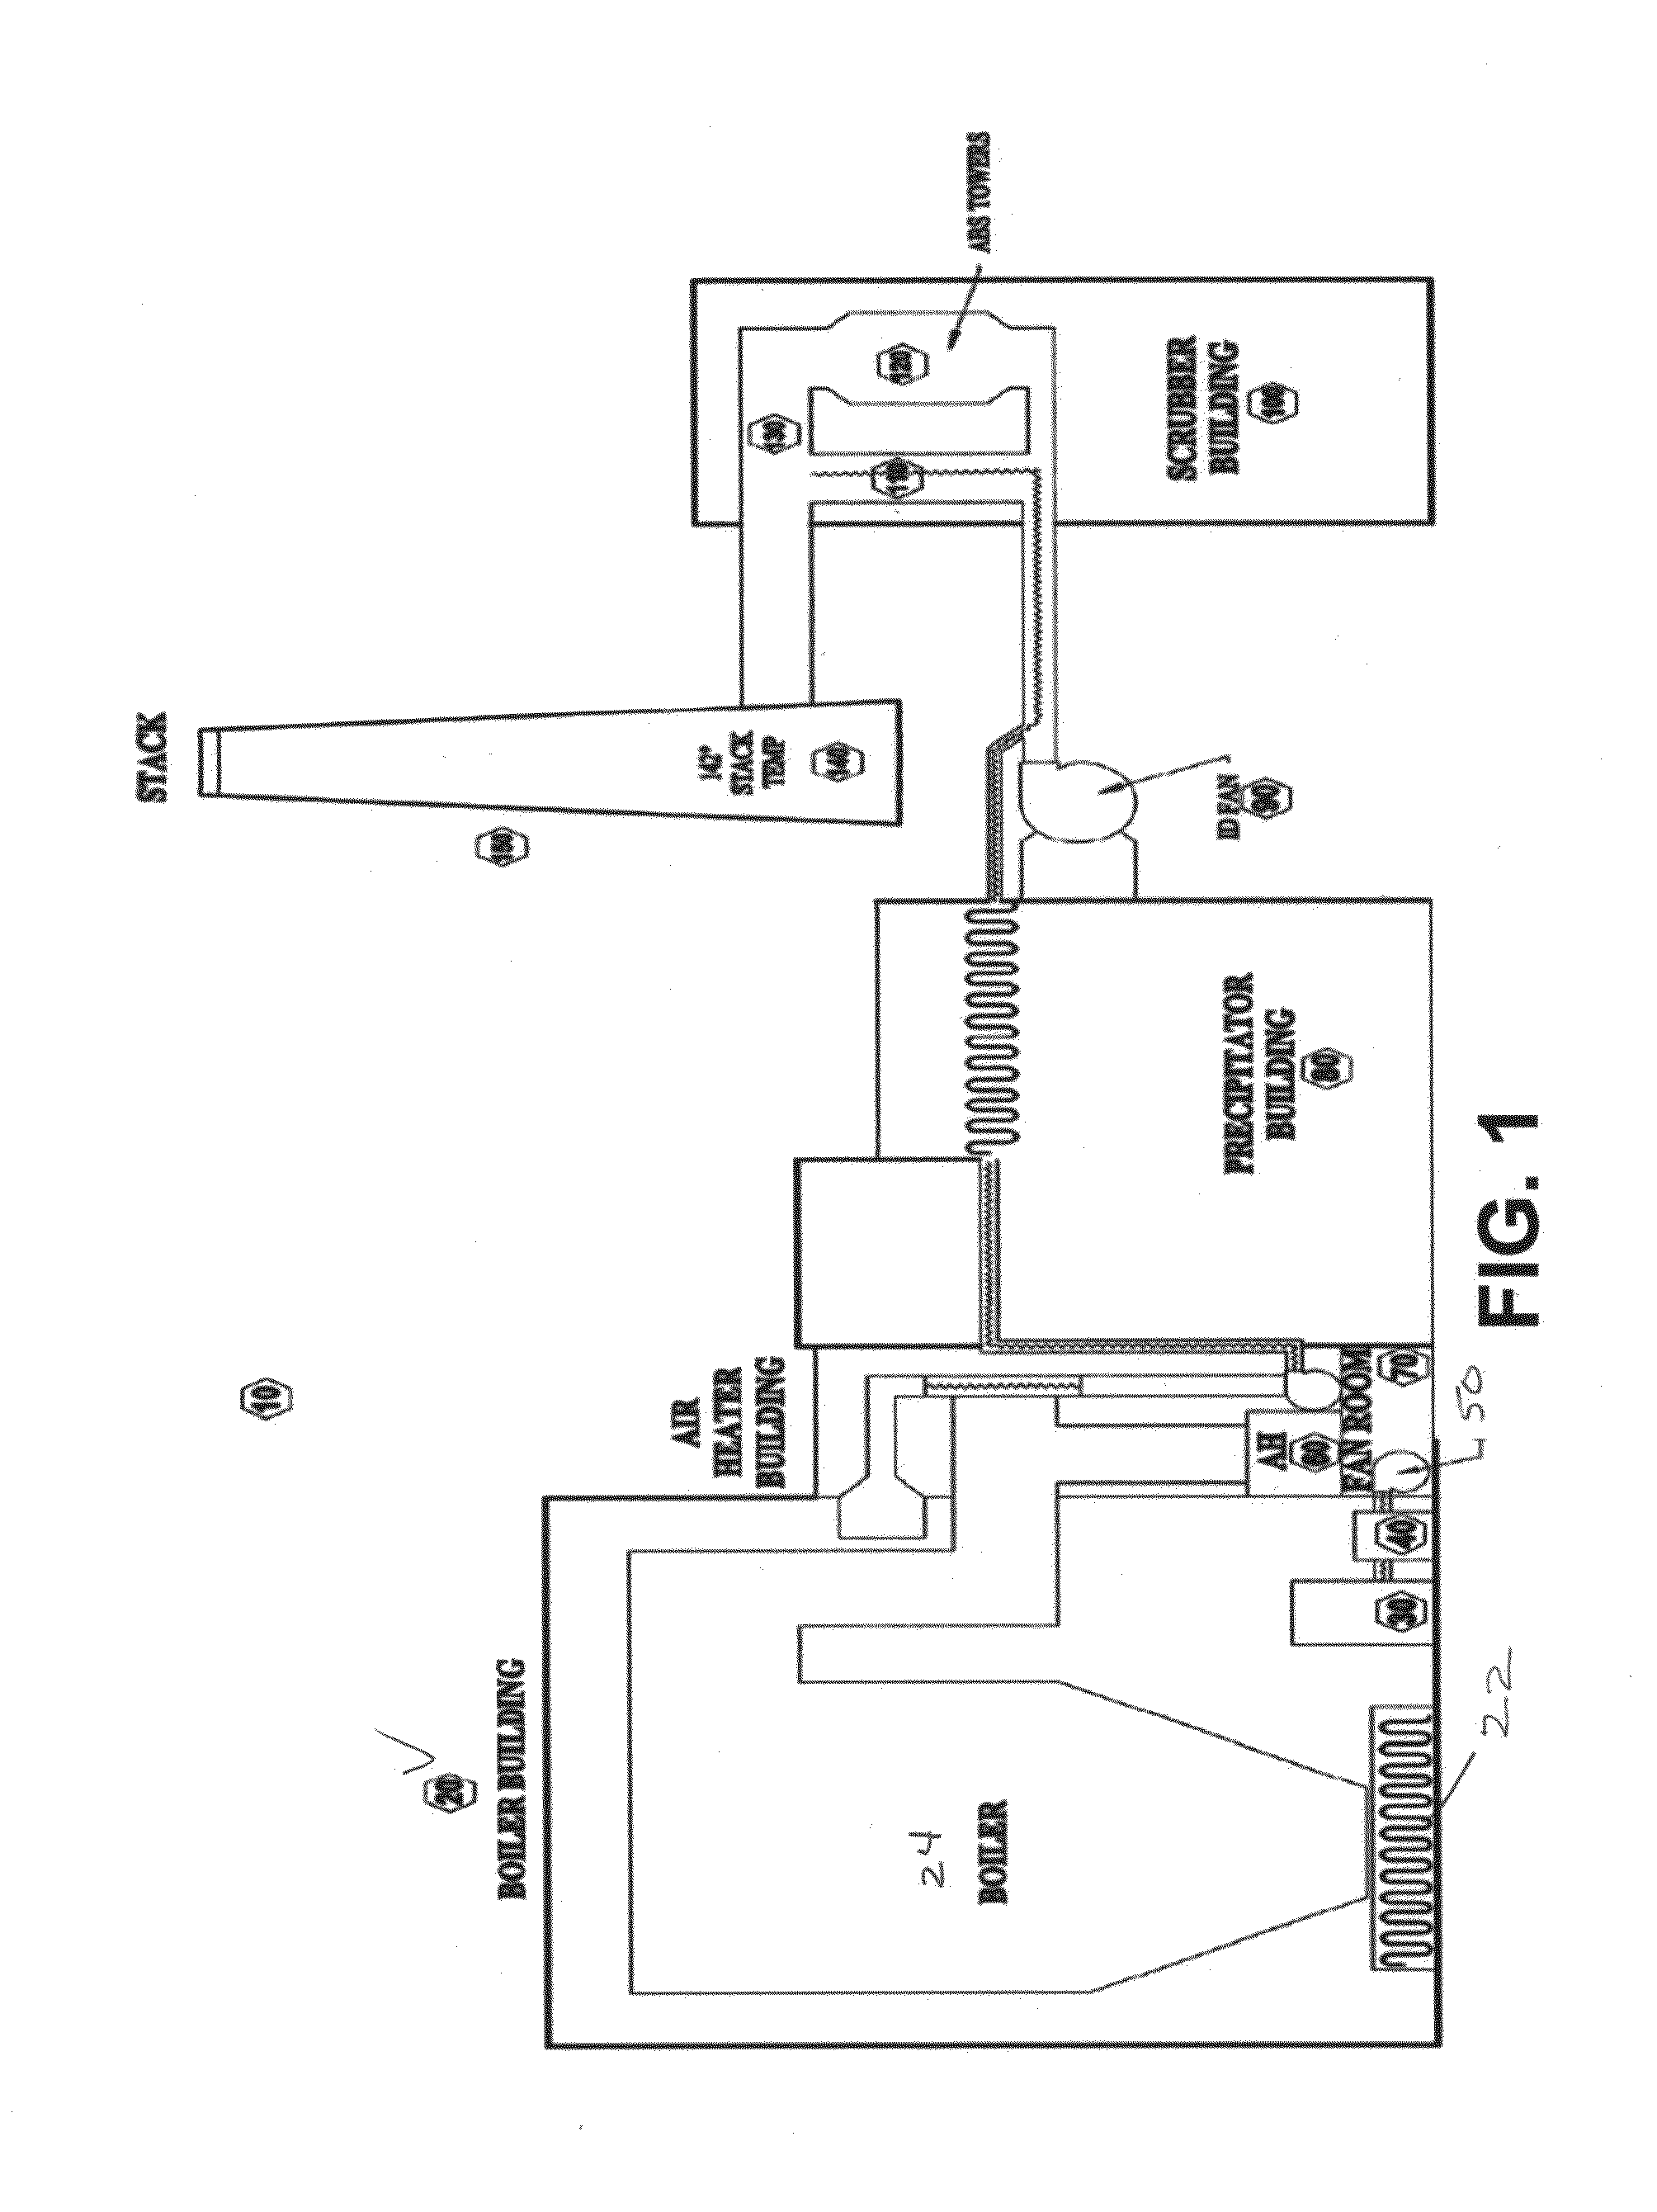 Method and system for reheating flue gas using waste heat to maintain dry chimney stack operation